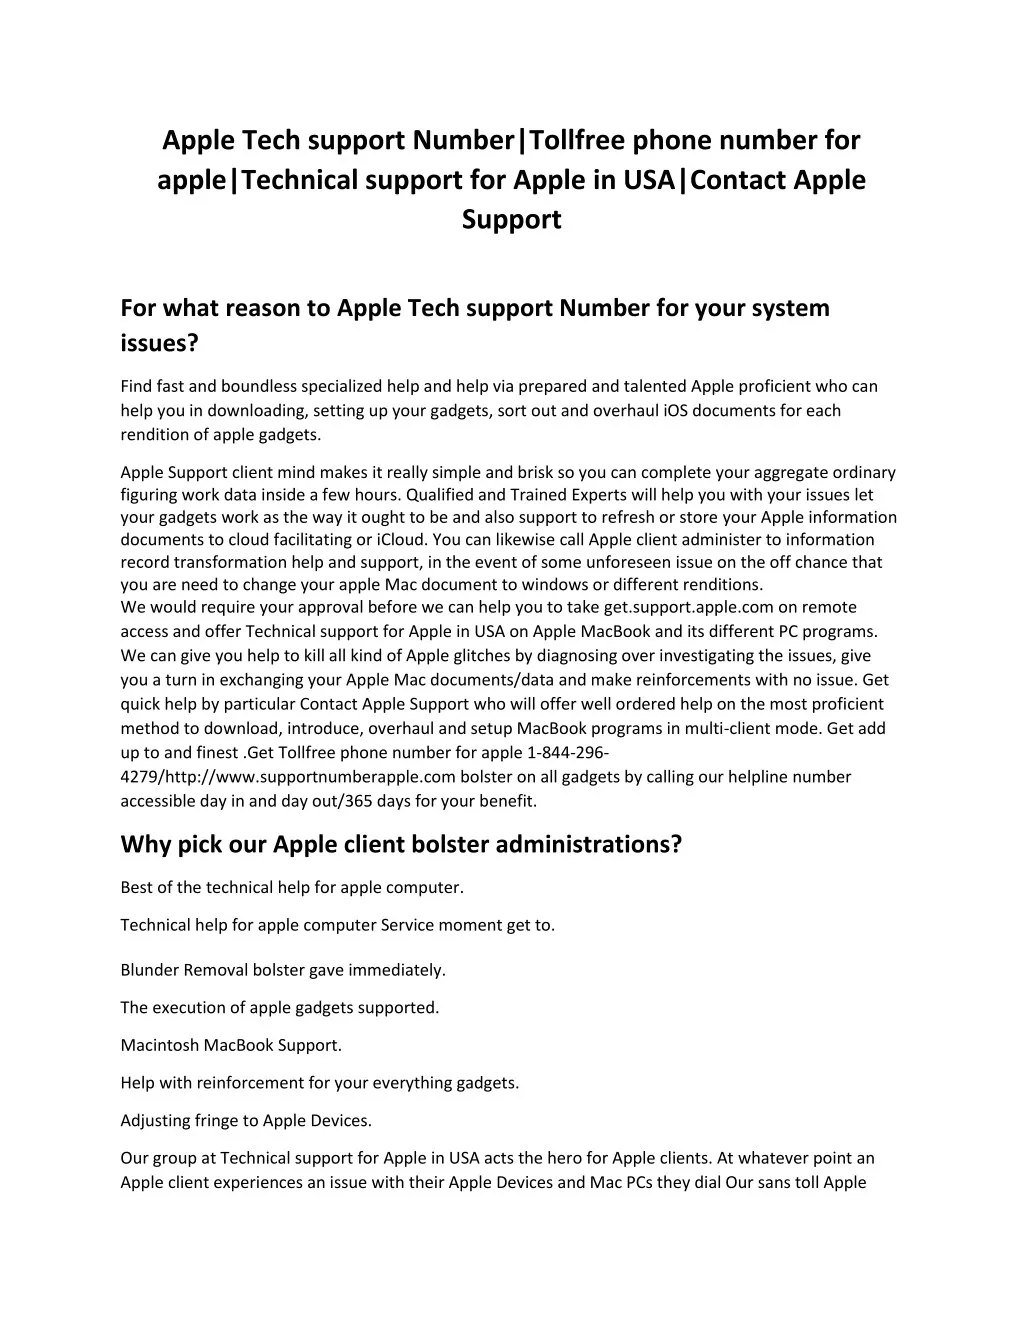 apple tech support number tollfree phone number